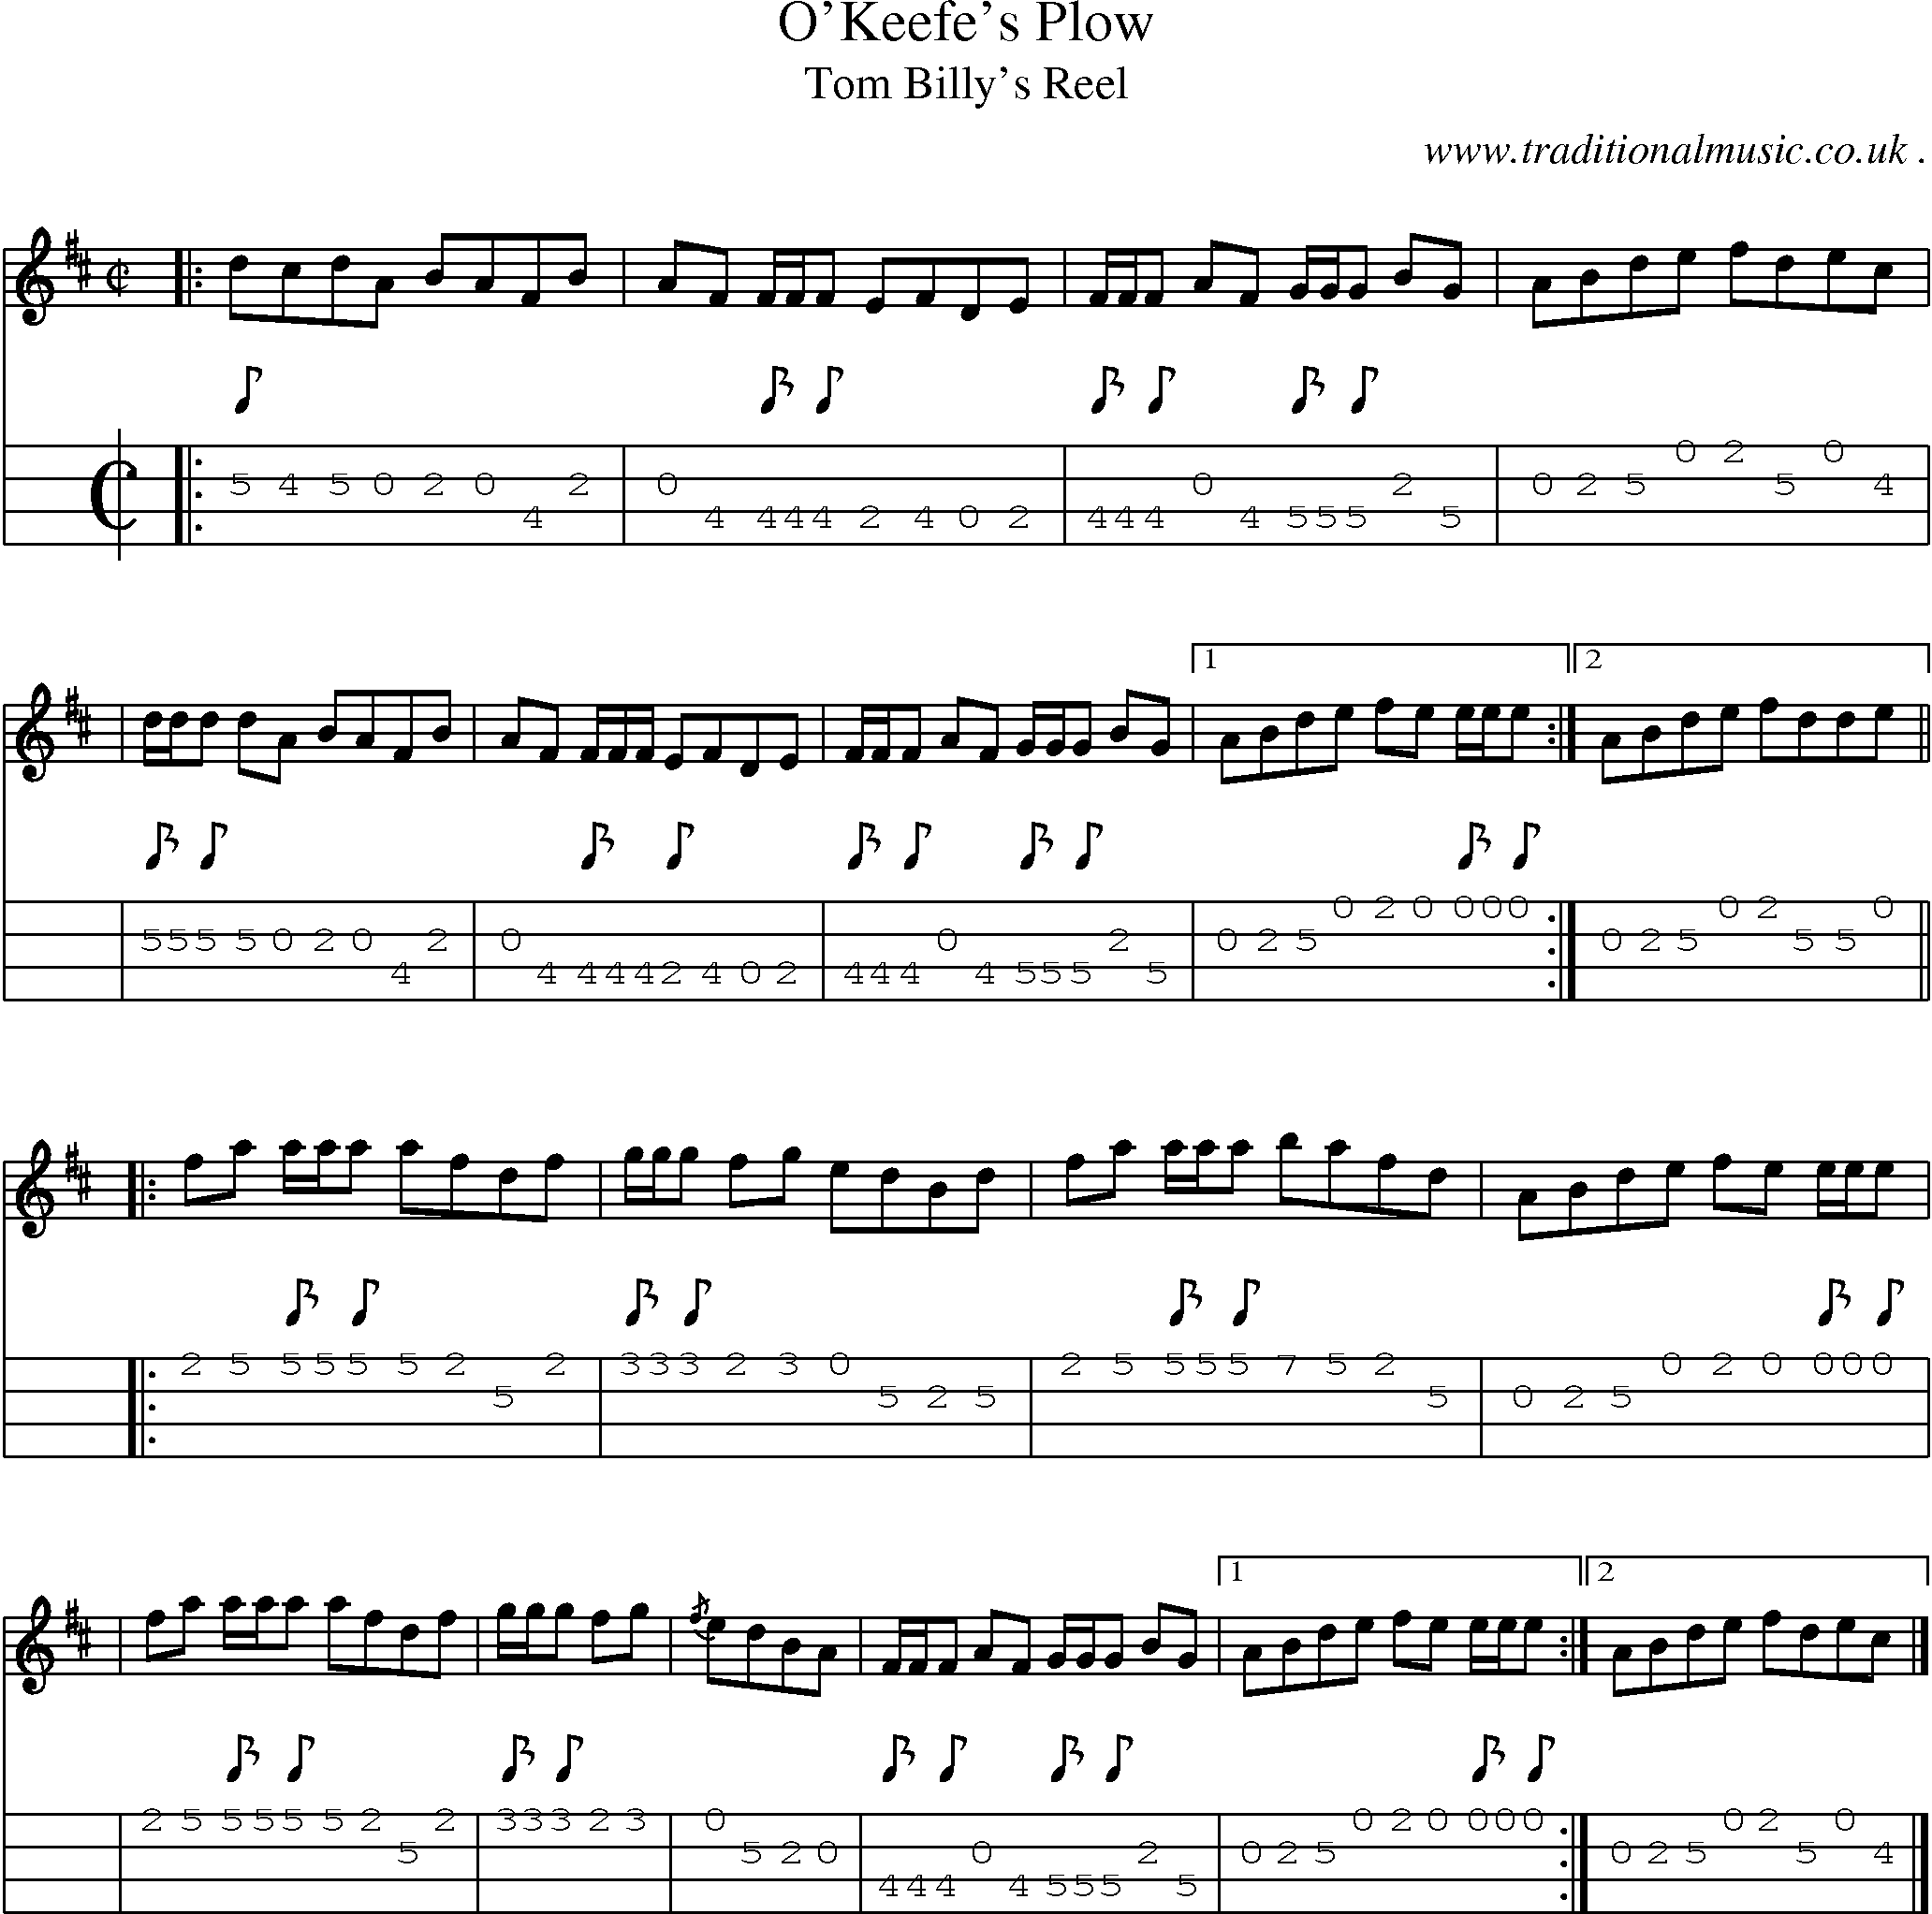 Sheet-music  score, Chords and Mandolin Tabs for Okeefes Plow